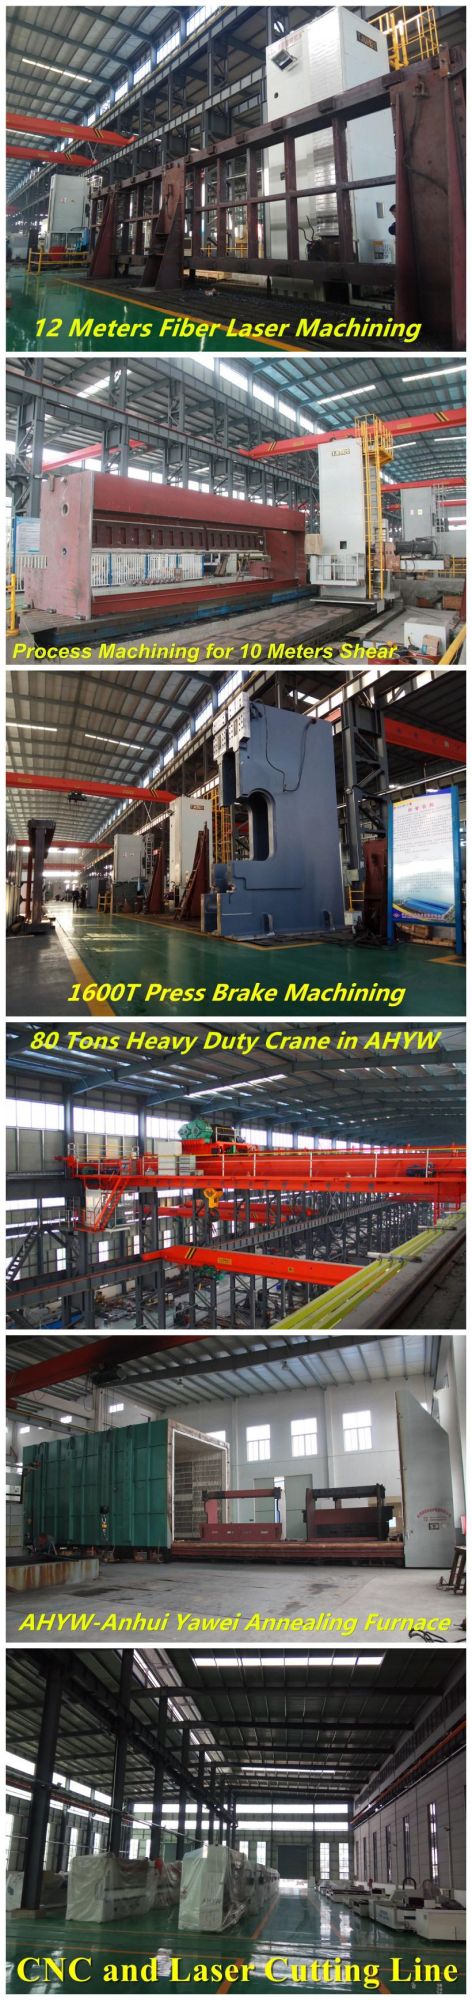 Amada Hydraulic Press Brake Machine with Hemming Tooling for Safety Door